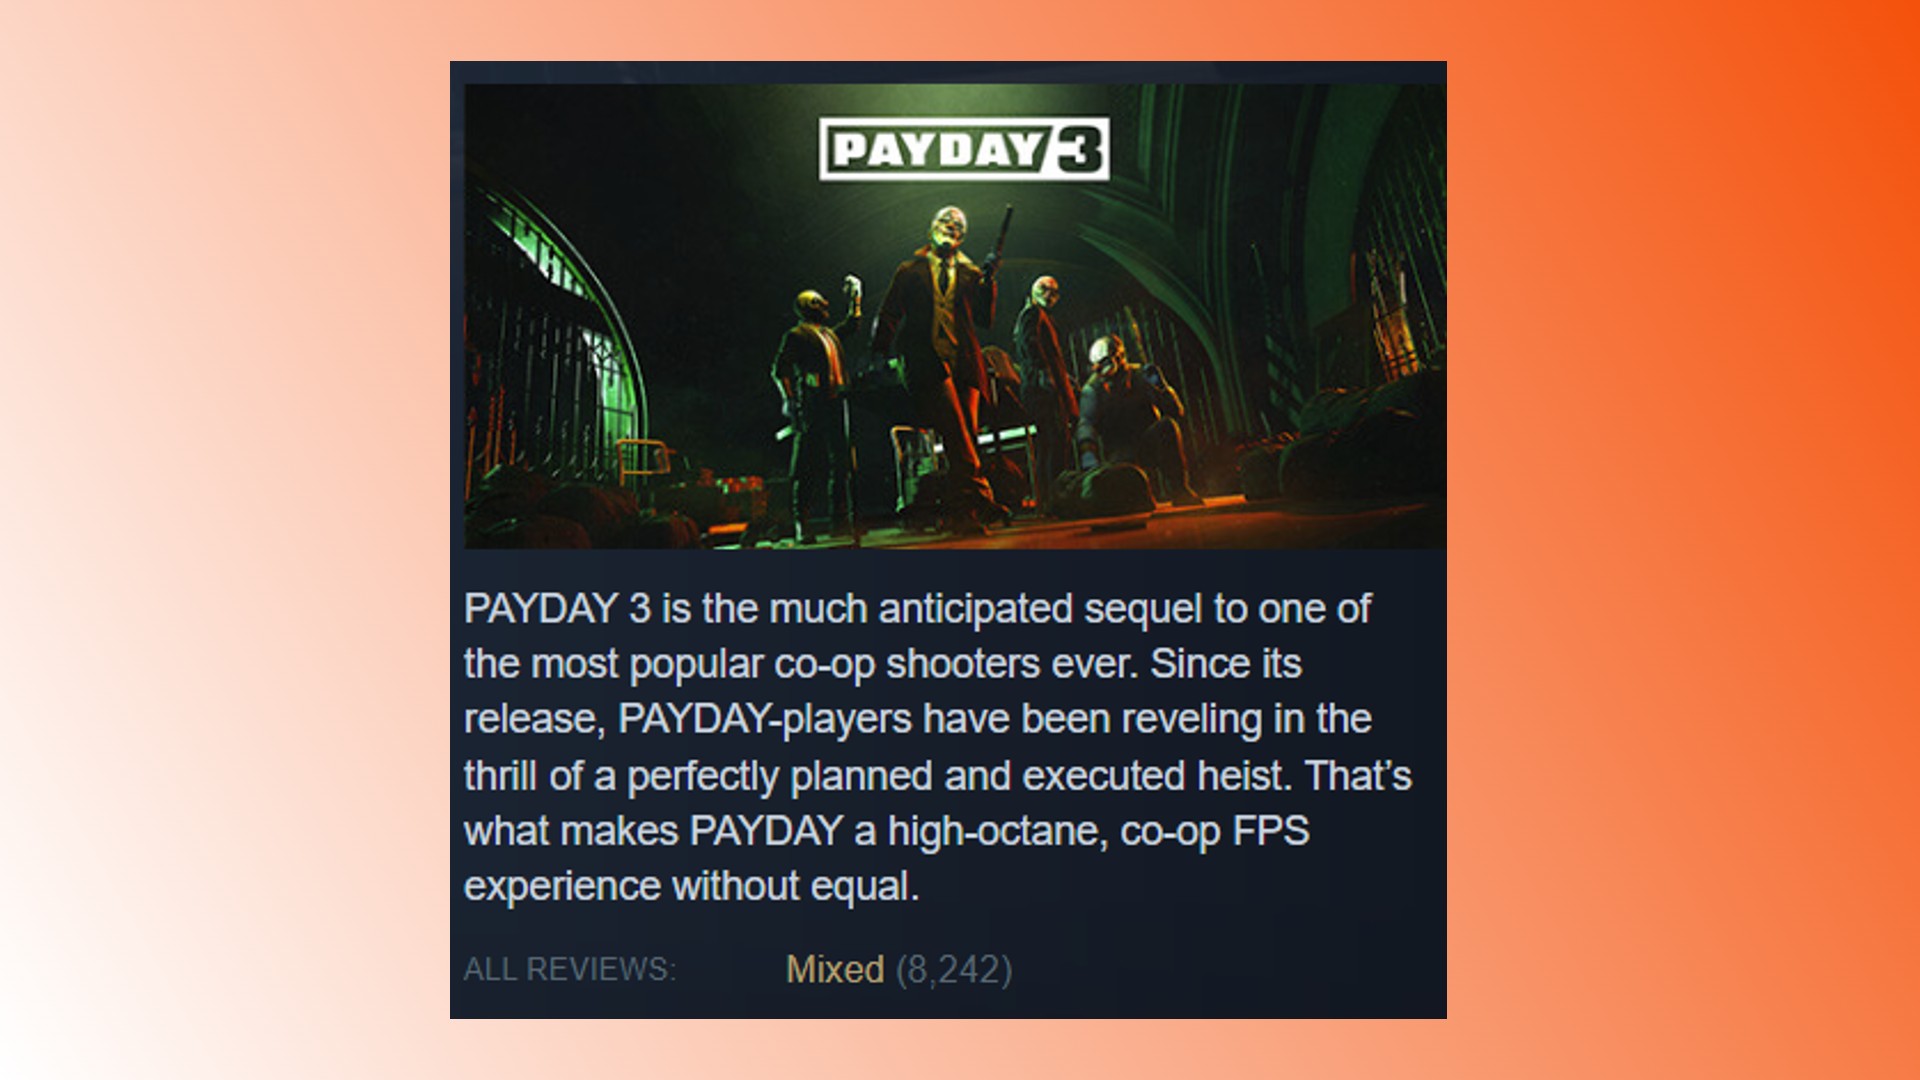 Payday 3 Steam reviews: The Payday 3 Steam page displaying its mixed rating from players